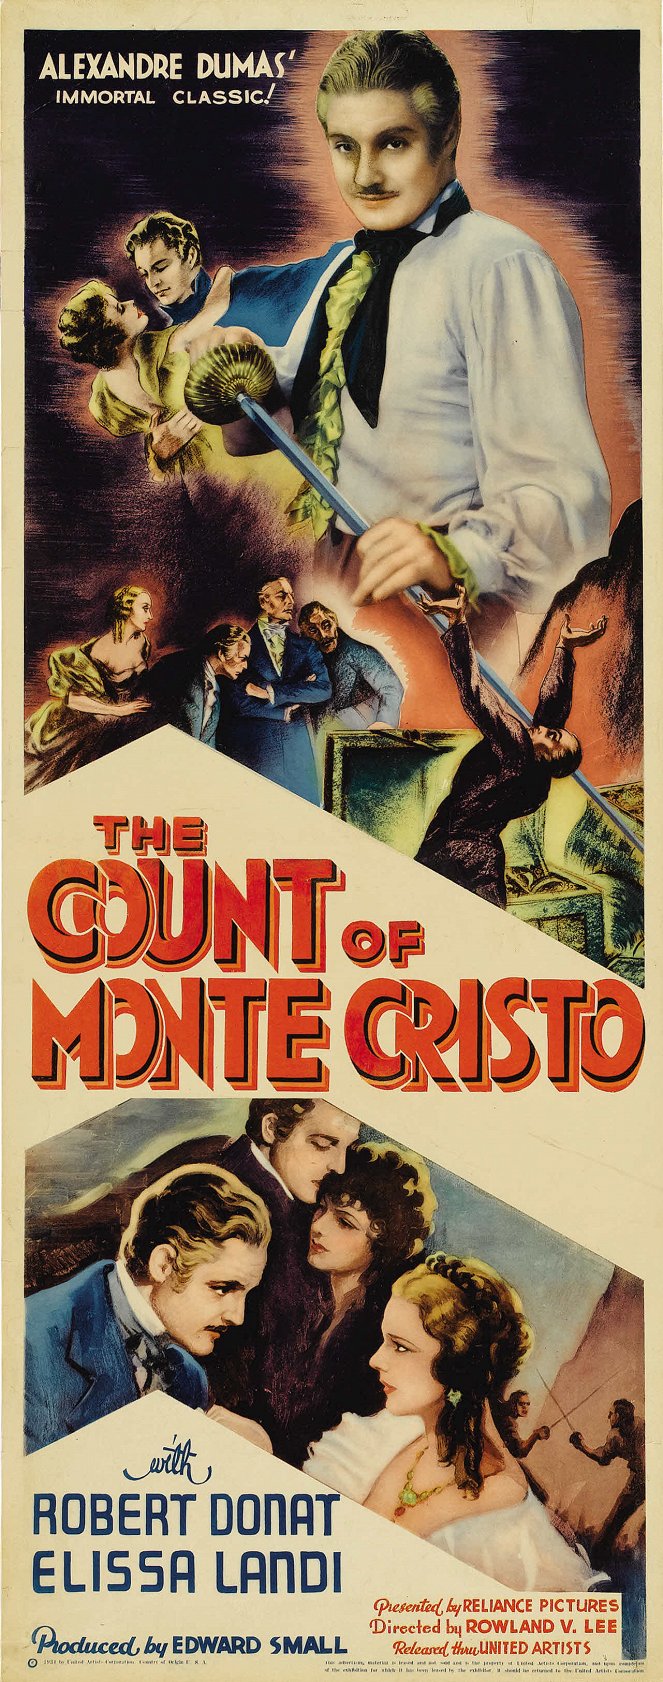 The Count of Monte Cristo - Posters